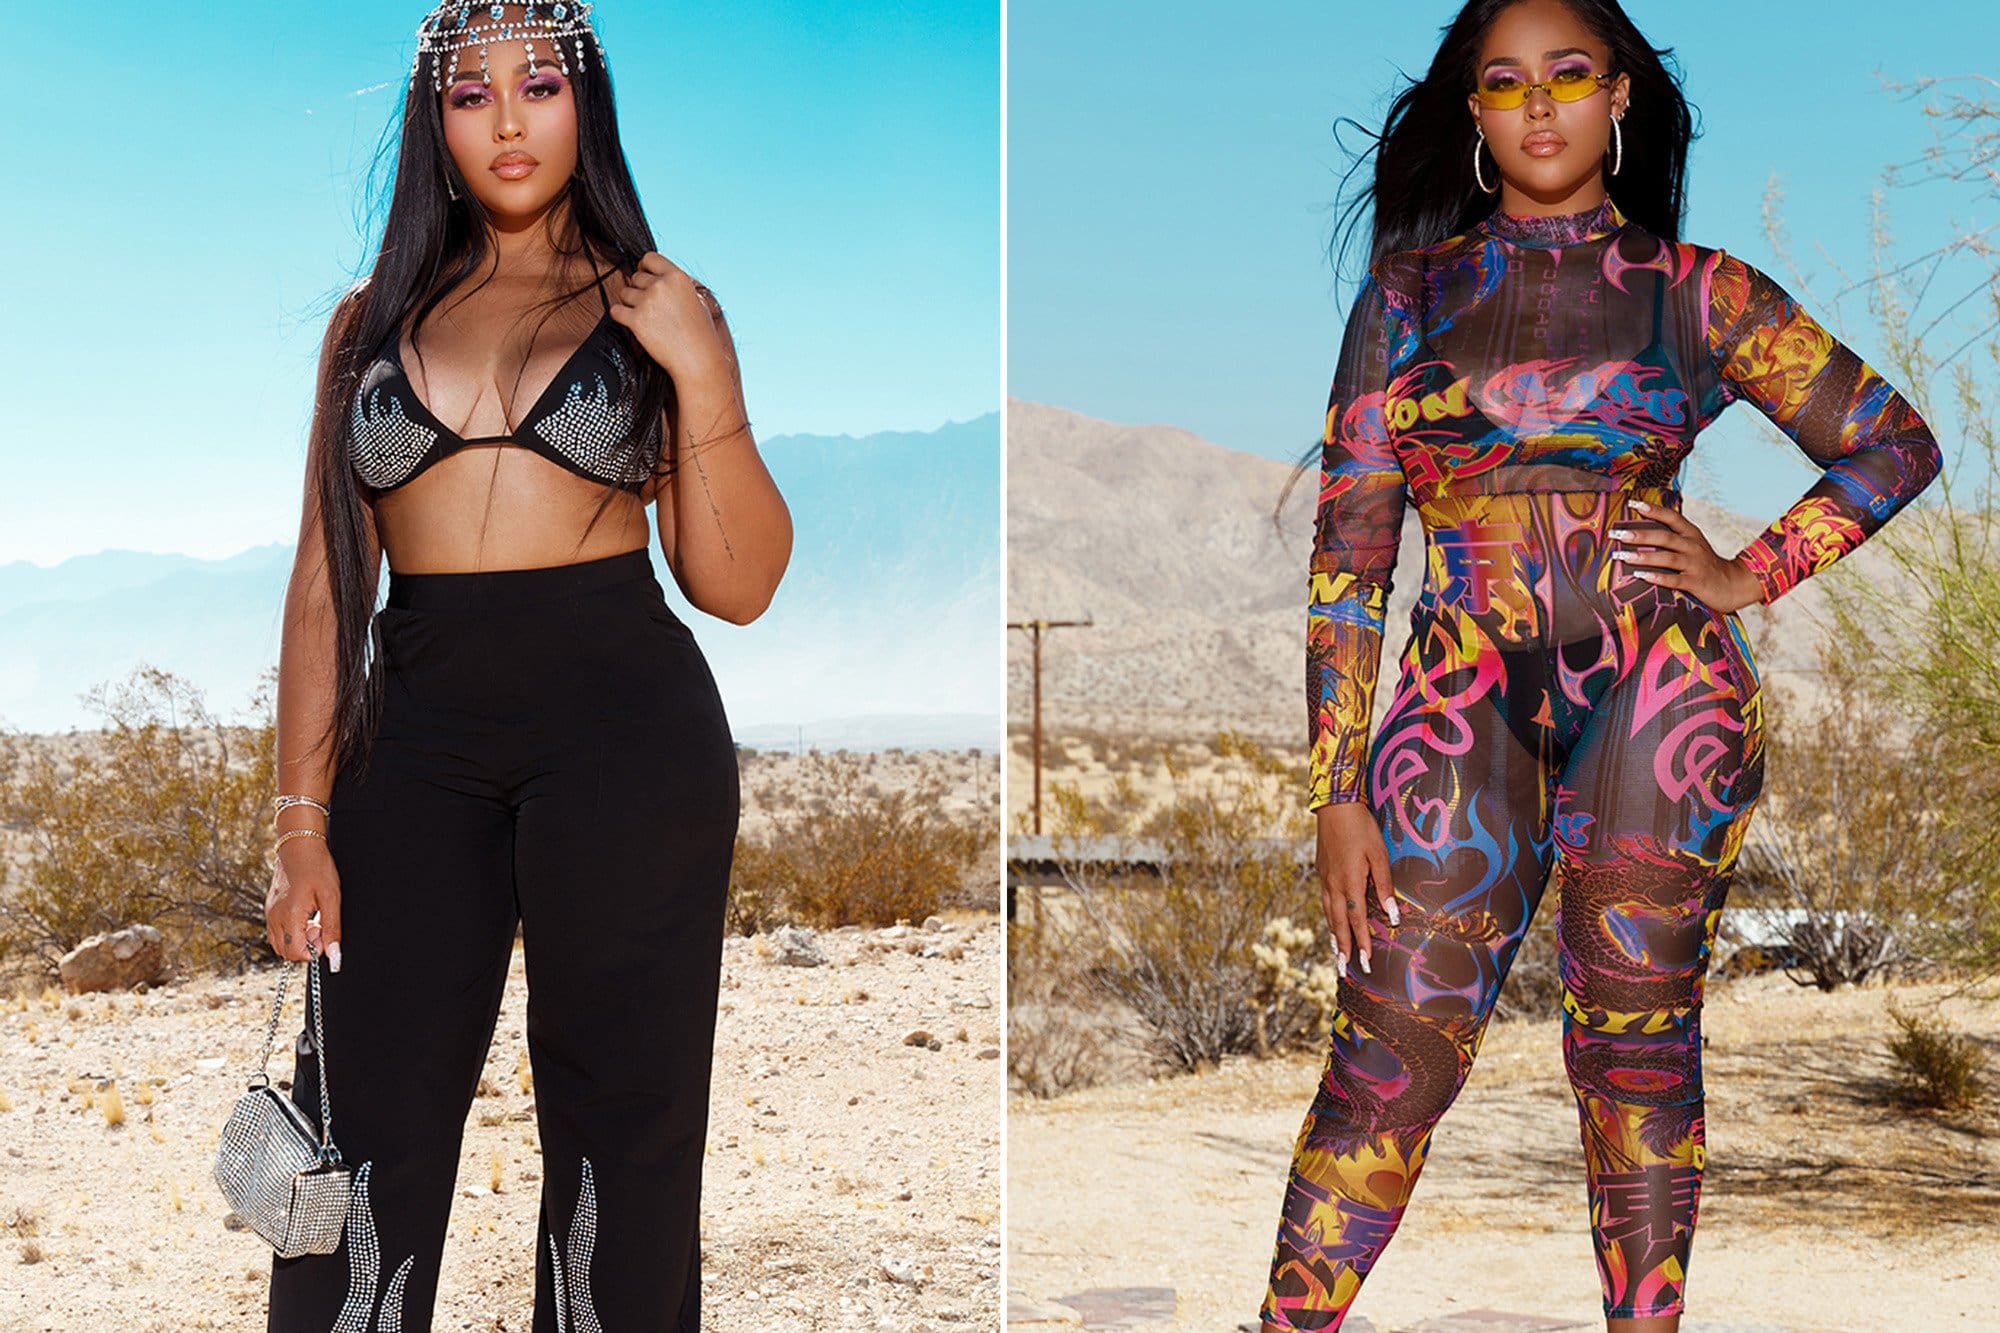 Jordyn Woods' Latest Jaw-Dropping Look Has Fans In Awe - See Her Flawless Makeup In This Photo